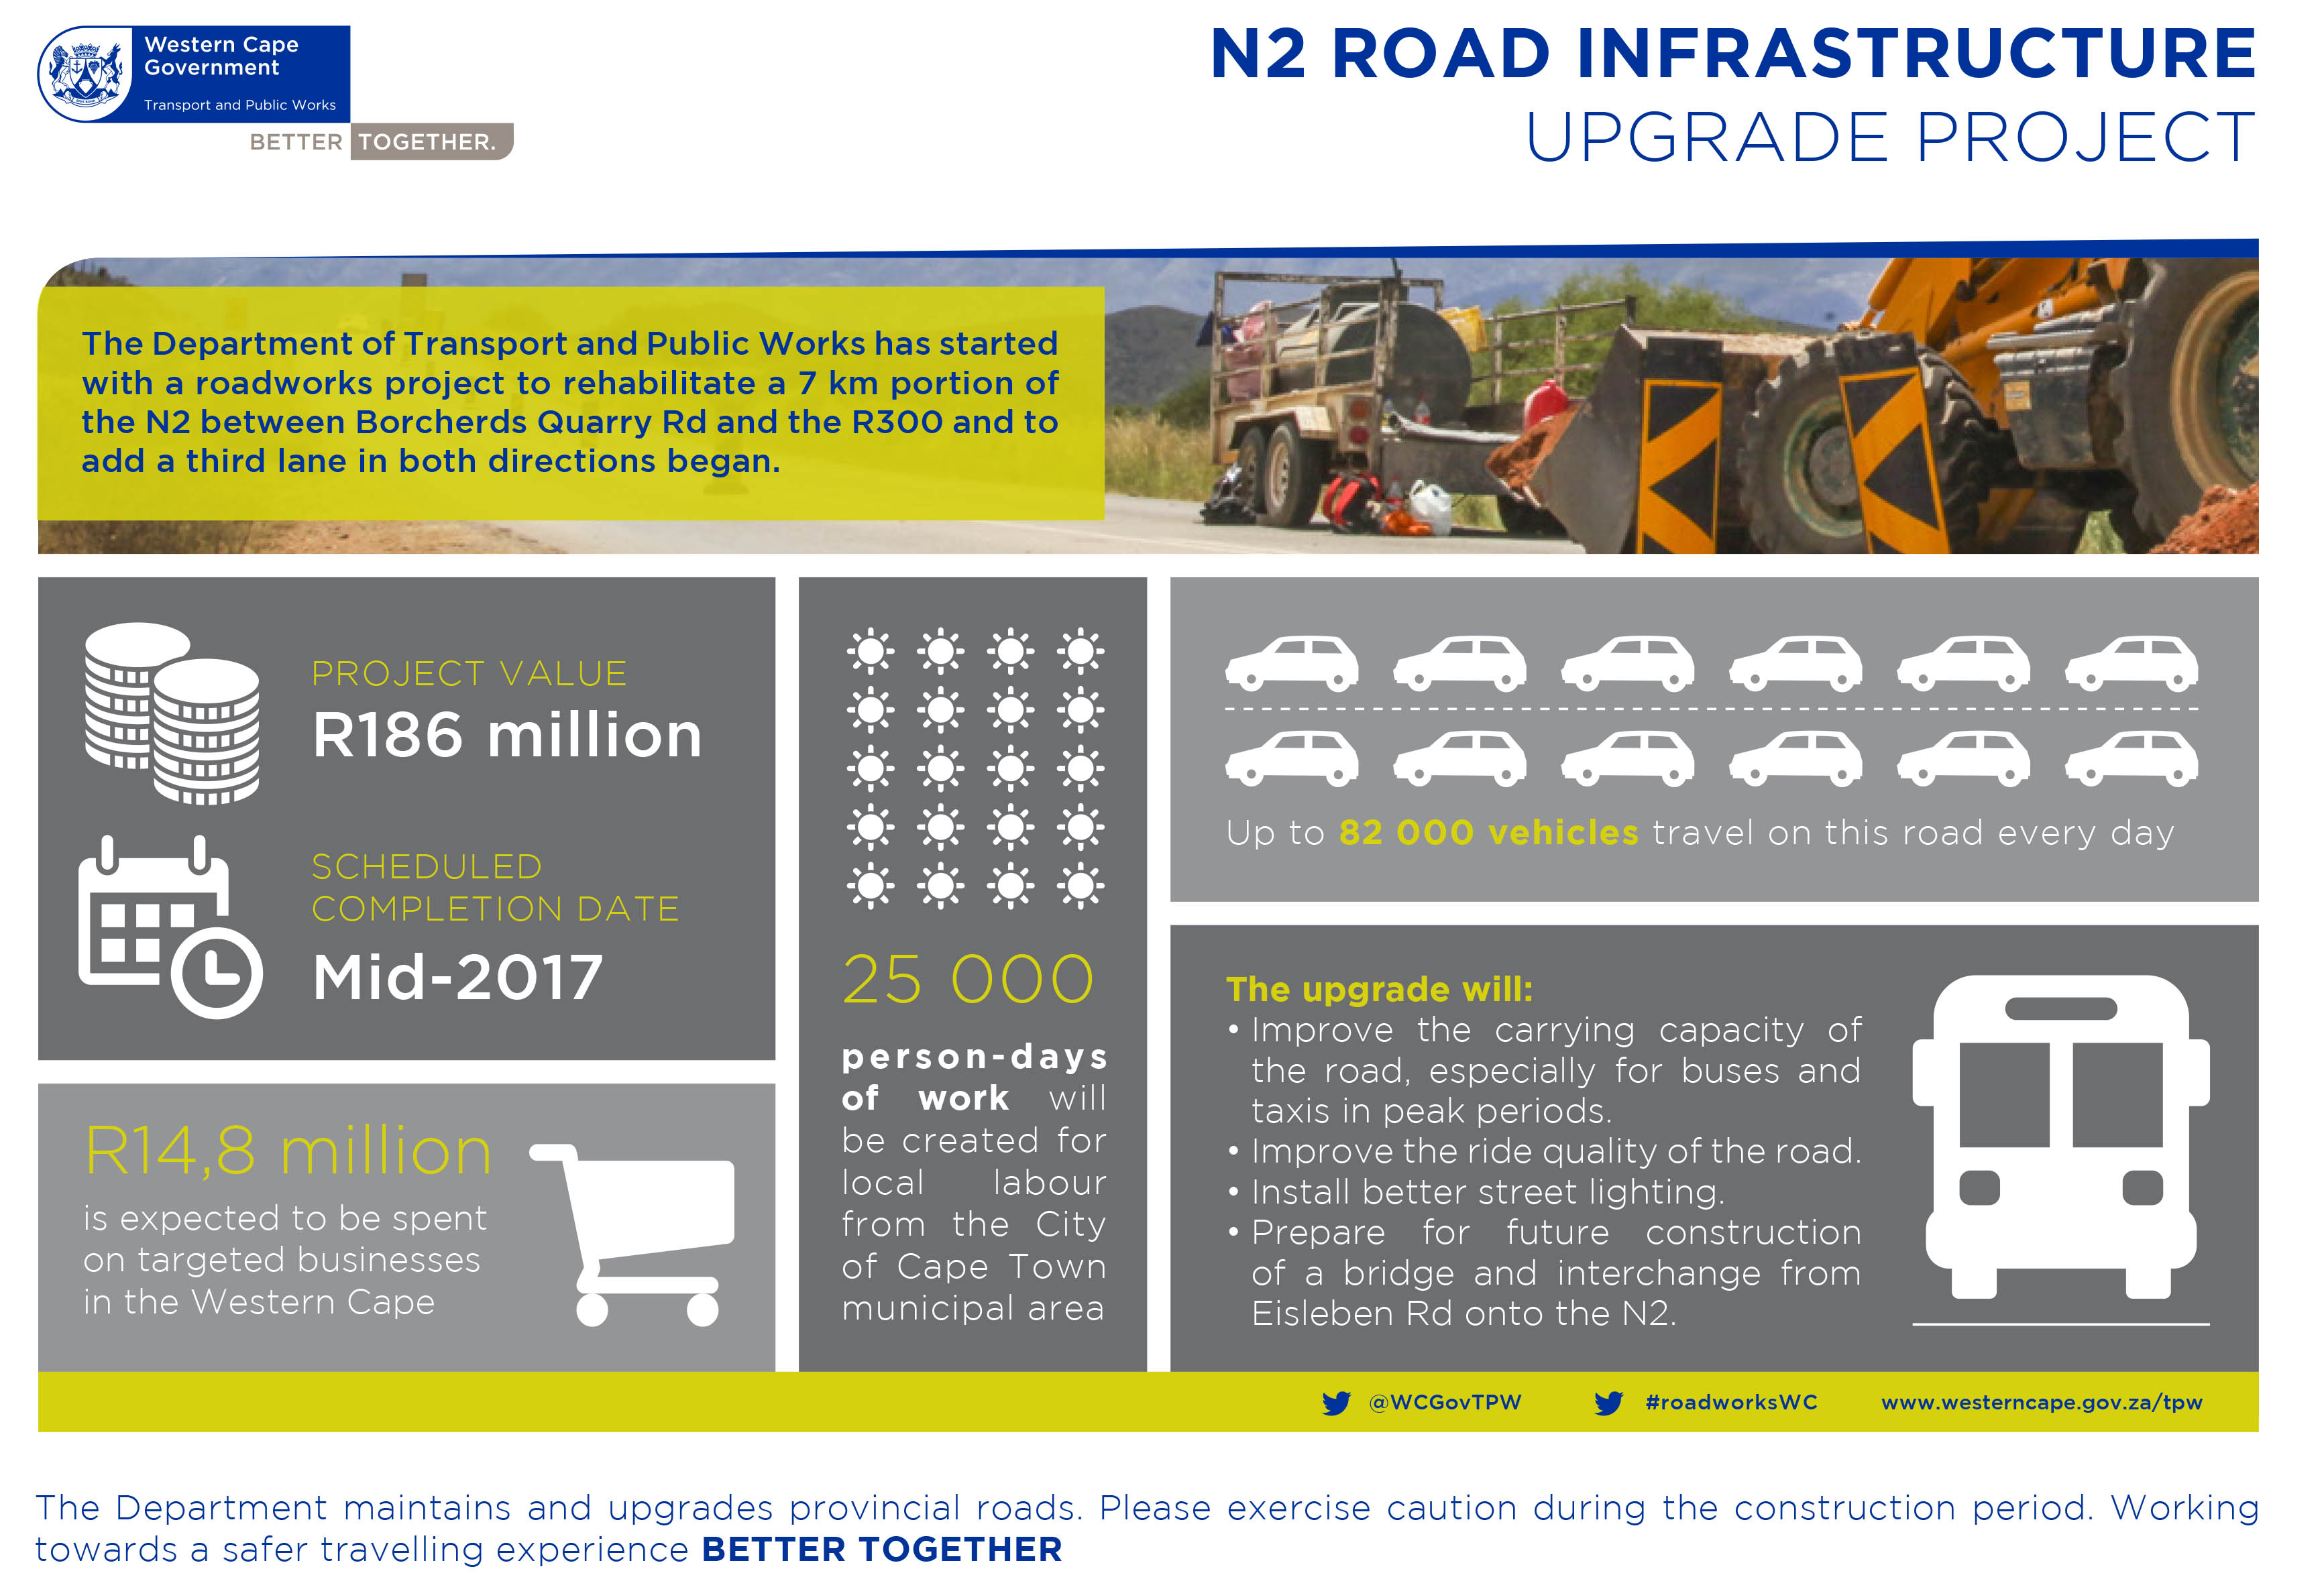 N2 upgrade project